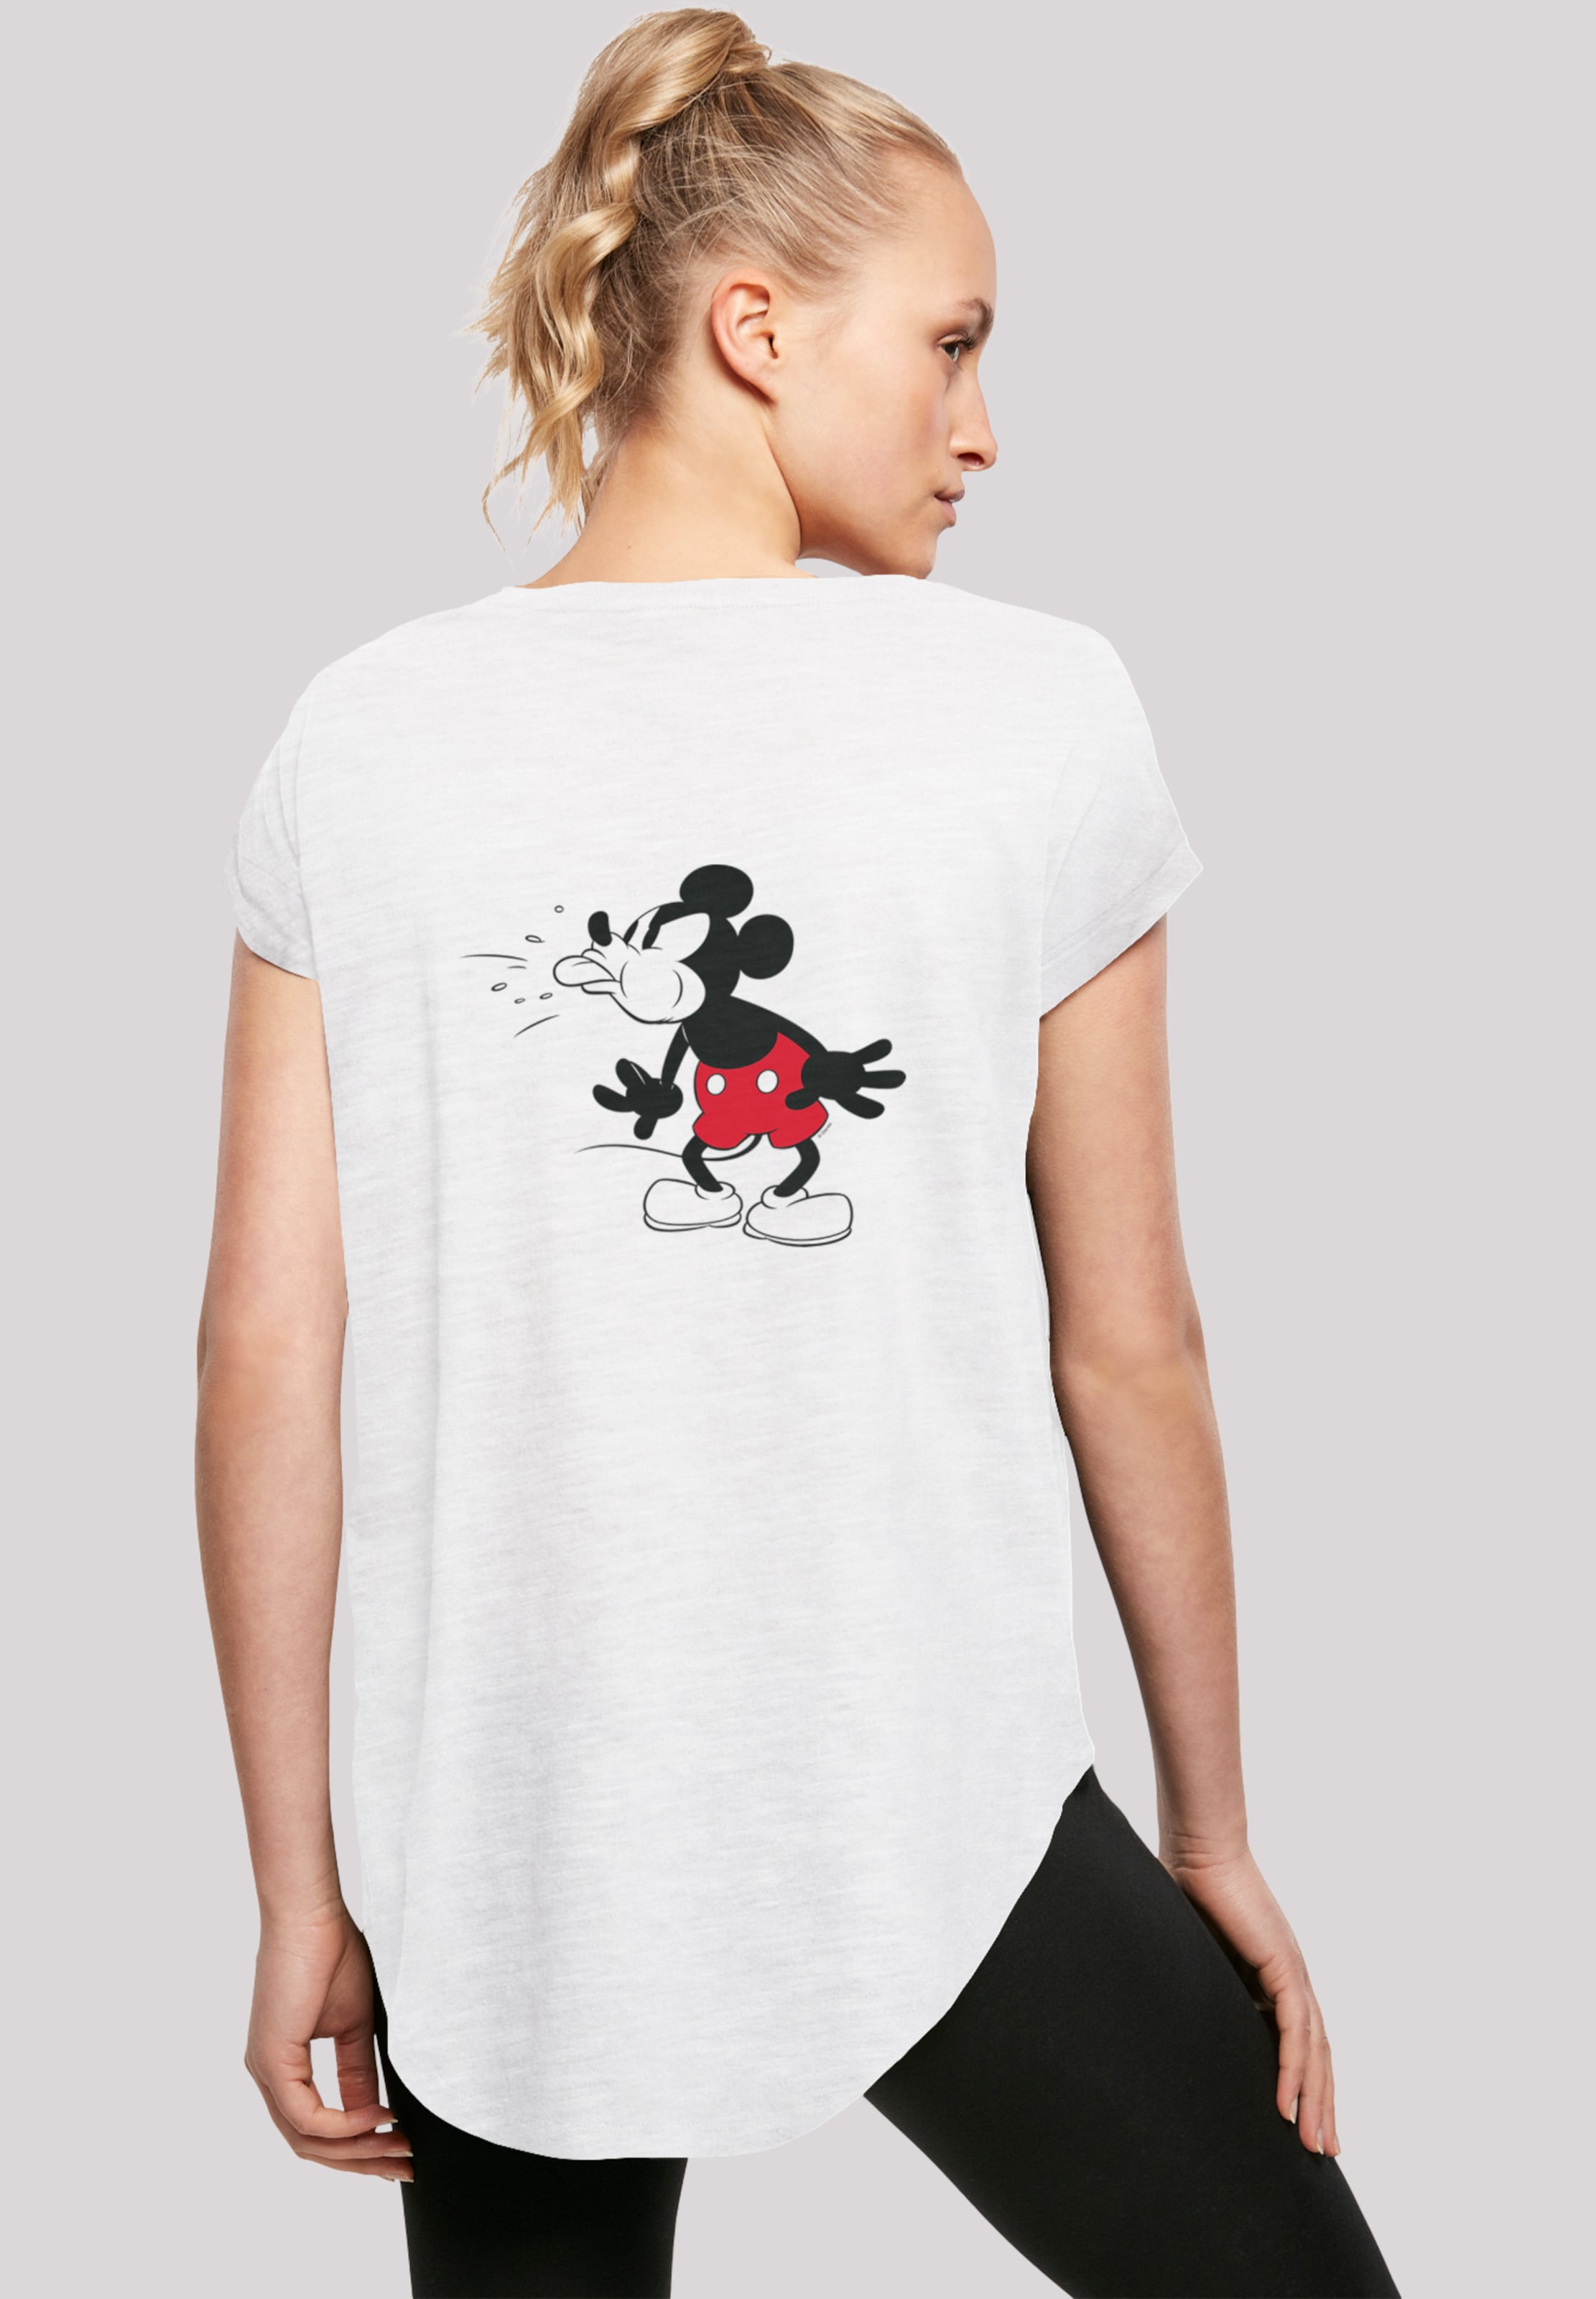 | Mouse Mickey Mottled in \'Disney YOU ABOUT White Shirt F4NT4STIC Tongue\'